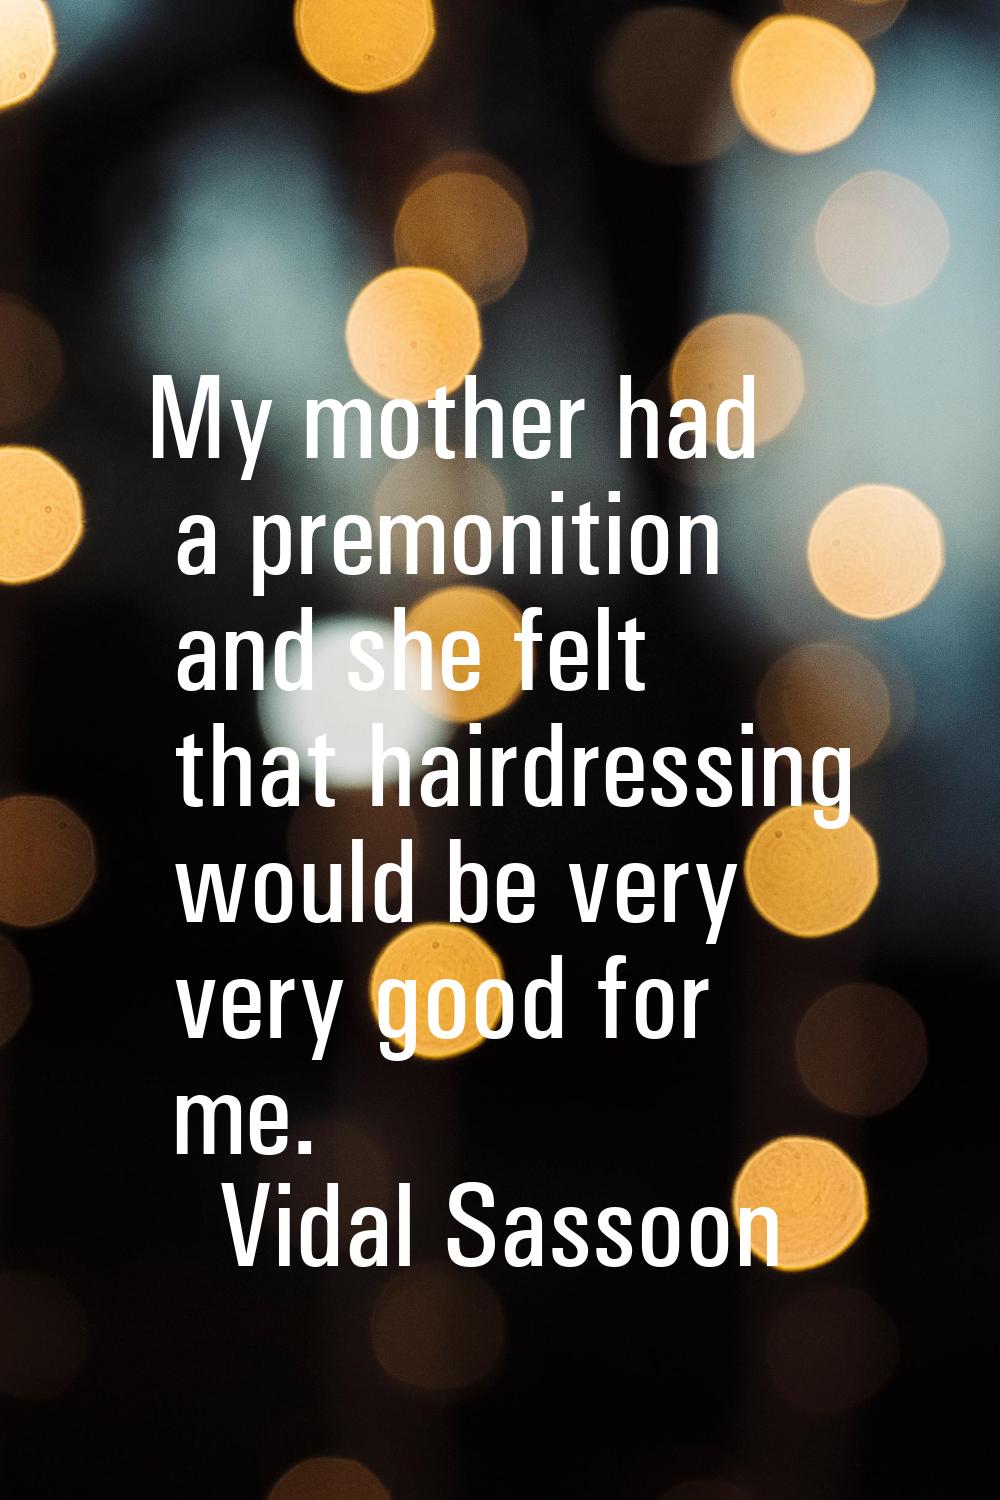 My mother had a premonition and she felt that hairdressing would be very very good for me.